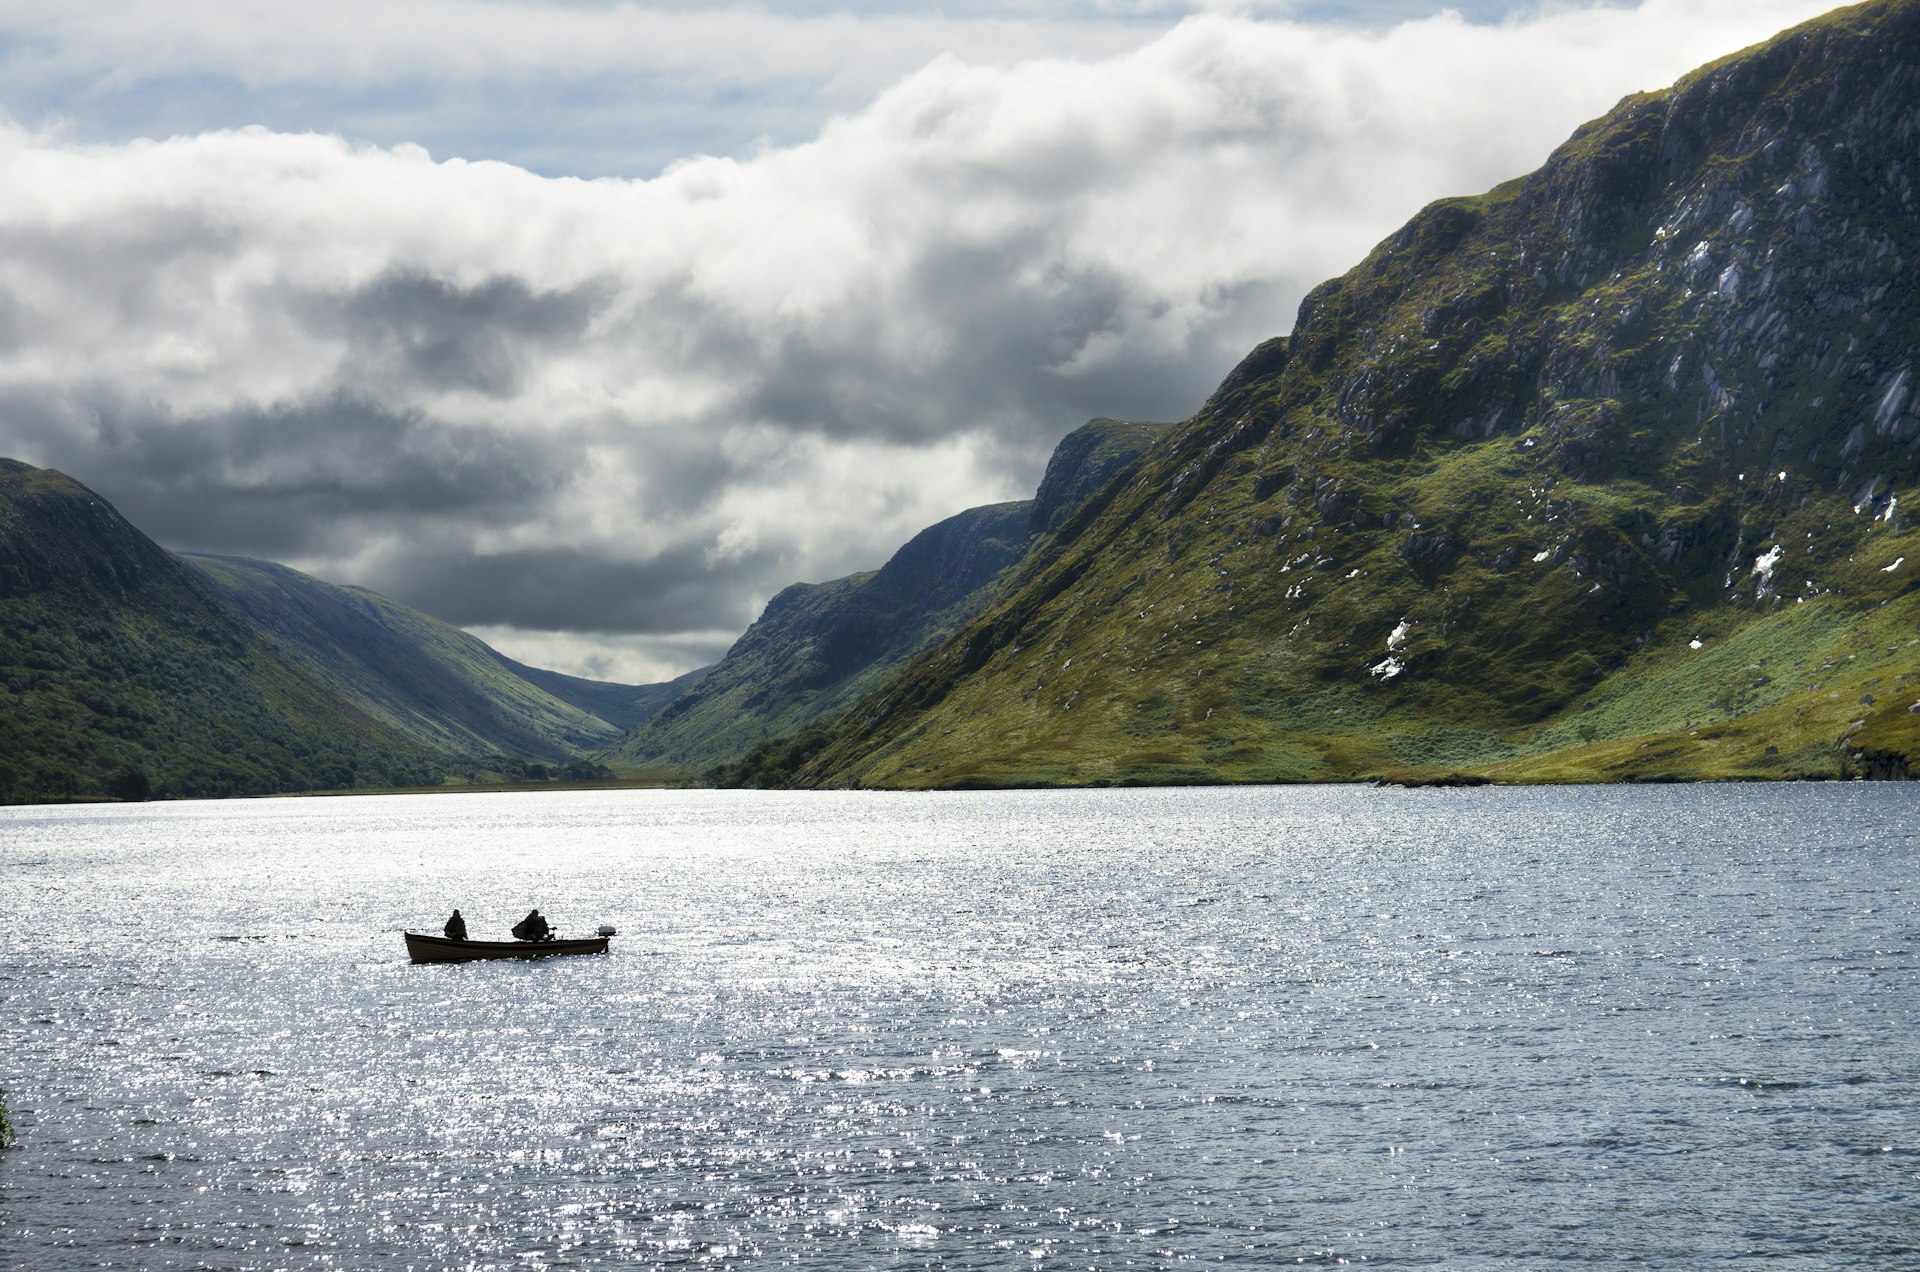 People canoe on a lake in Glenveagh National Park, framed by green mountains